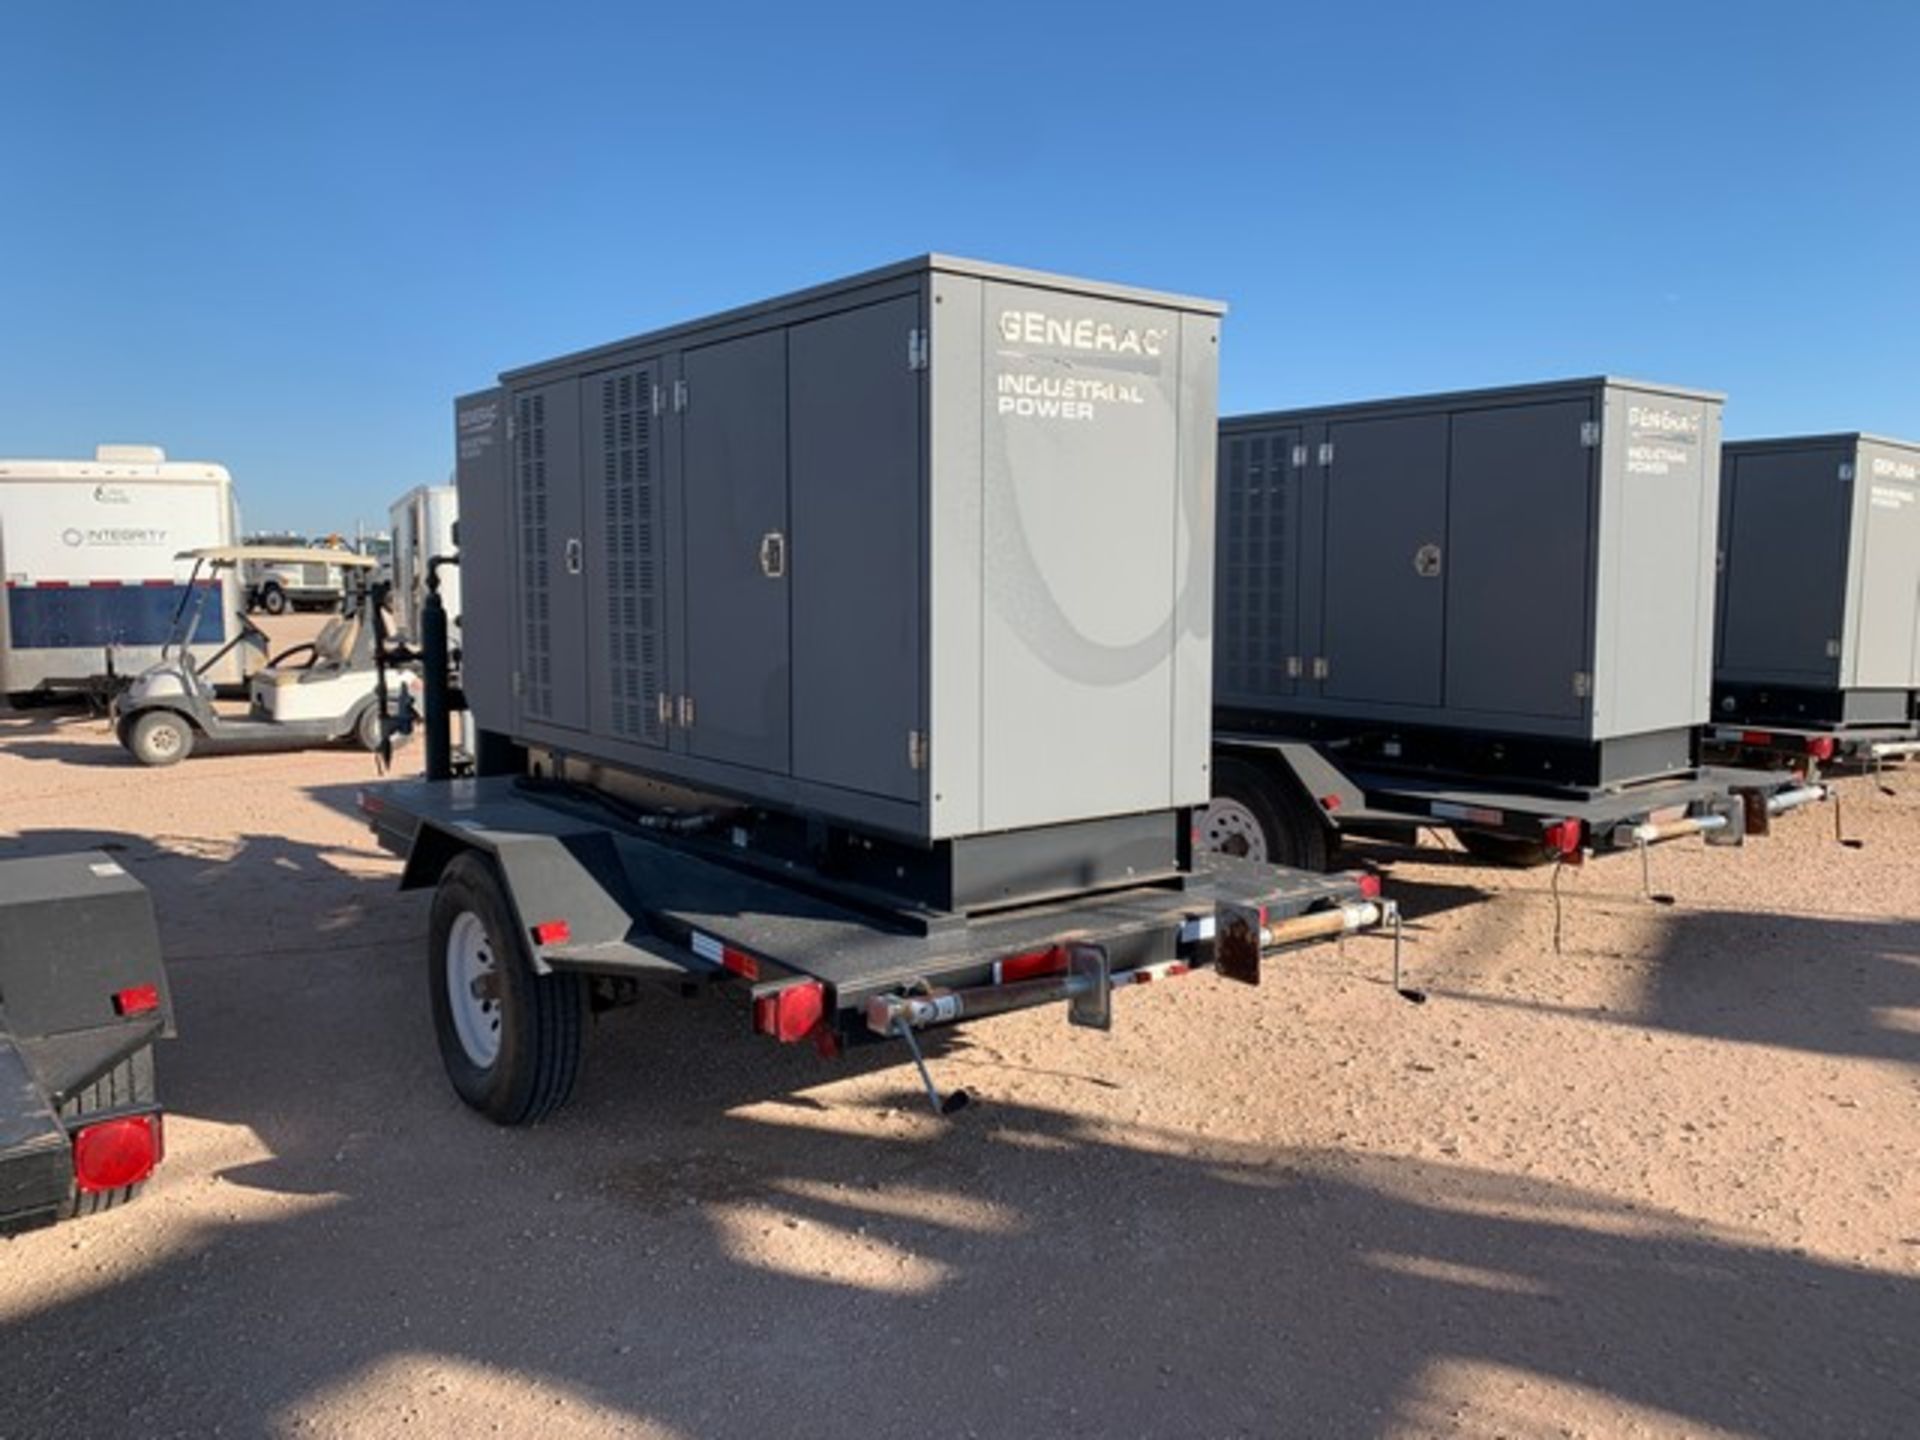 Located in YARD 1 - Midland, TX (2938) 2013 GENERAC INDUSTRIAL POWER 130 KW, 277/480V 3 PHASE - Image 4 of 4